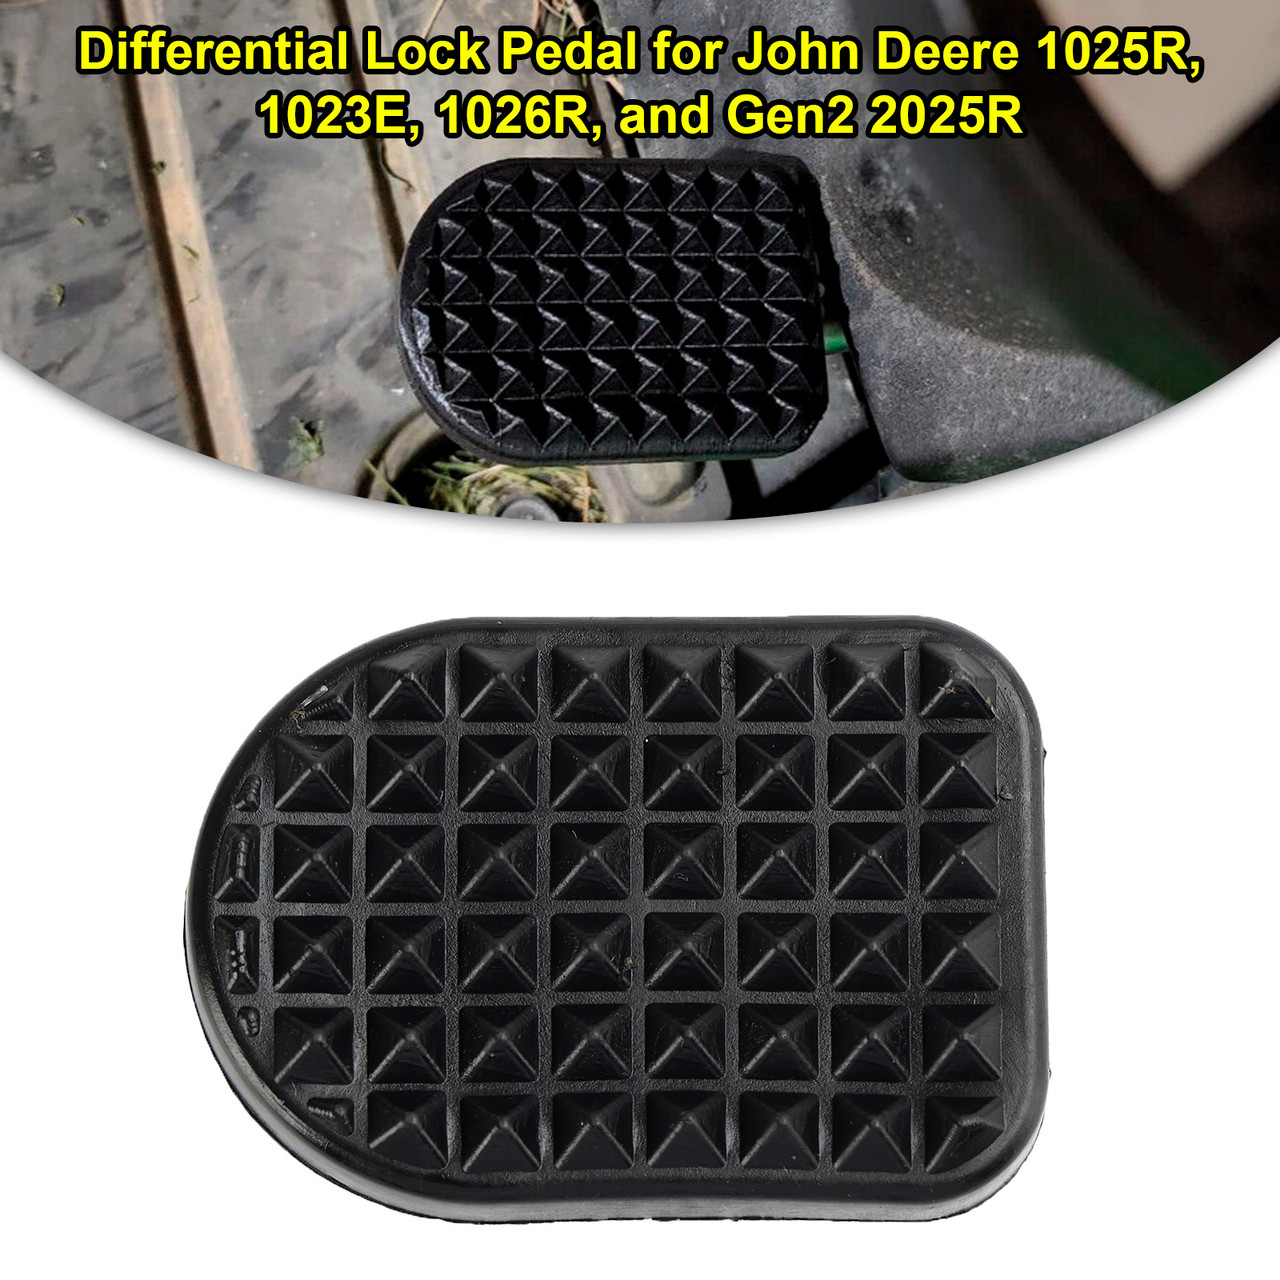 Differential Lock Pedal for John Deere 1025R, 1023E, 1026R, and Gen2 2025R